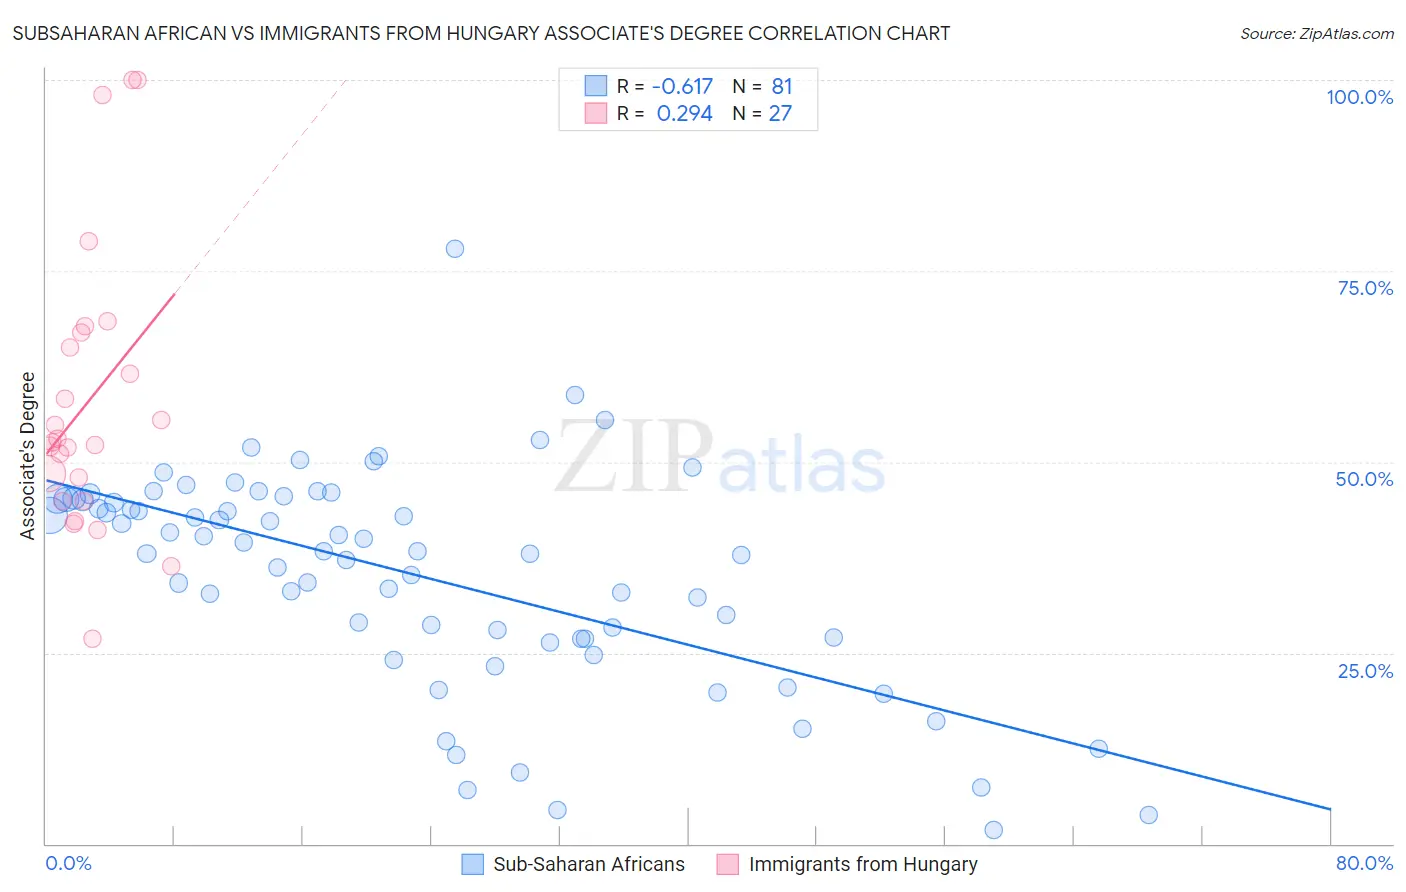 Subsaharan African vs Immigrants from Hungary Associate's Degree